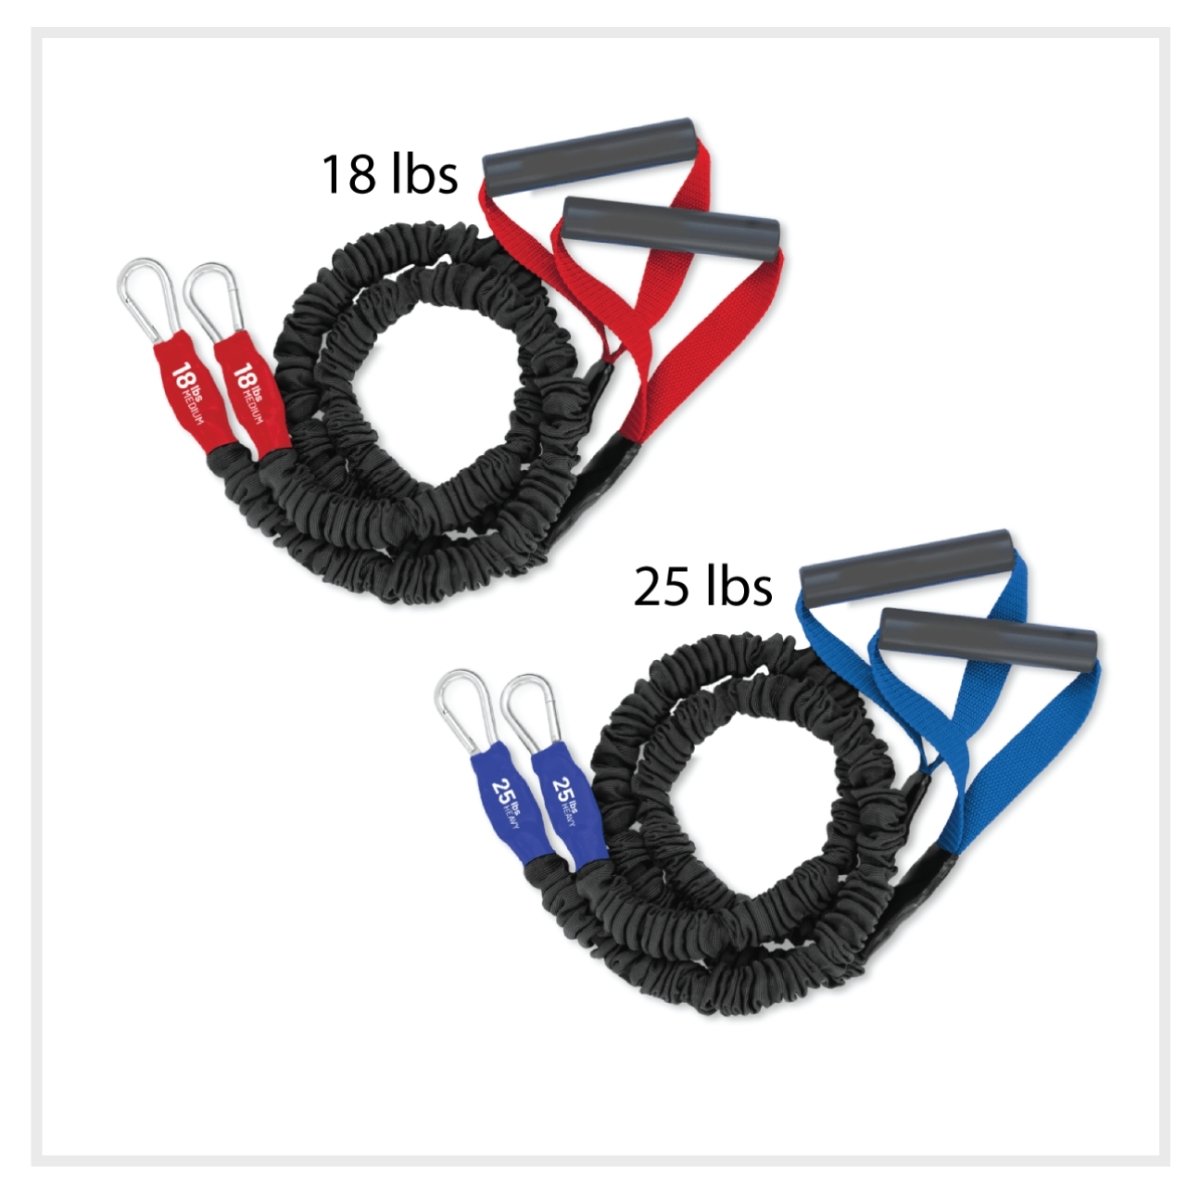 ARM AND SHOULDER RESISTANCE BAND MADE IN AMERICA AND HIGHER QUALITY THAT CROSSOVER SYMMETRY OR 4KOR. LABORATORY TESTED AND PATENTED BUNGEE STYLE RESISTANCE BANDS FACTORY DIRECT FOR YOUR BEST PRICE.